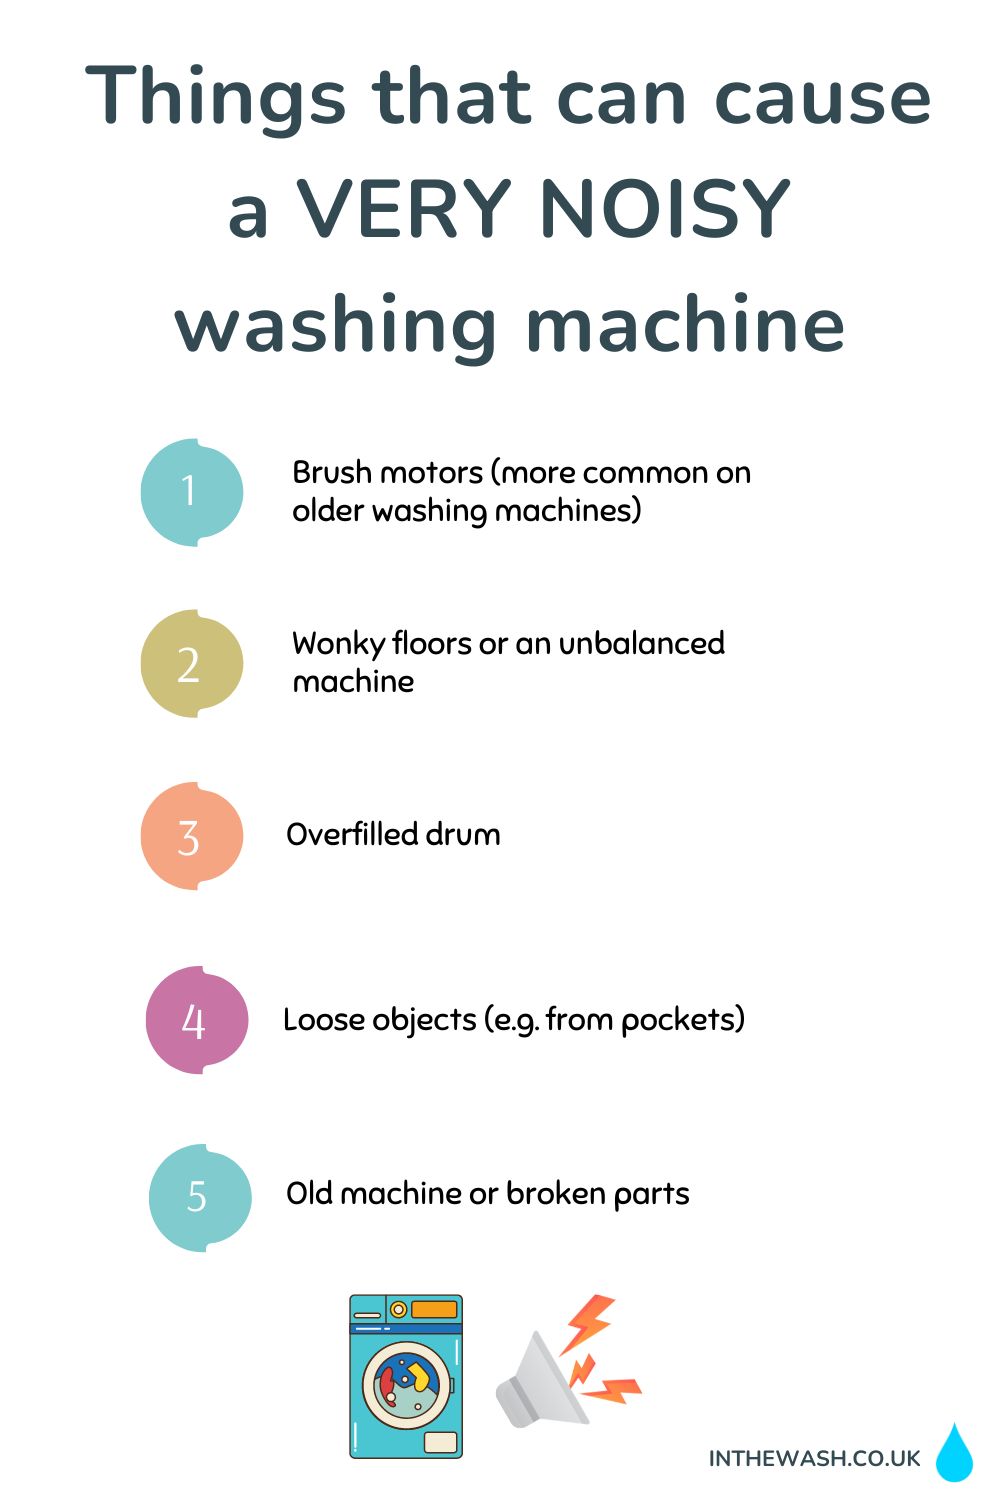 Things that can cause a very noisy washing machine